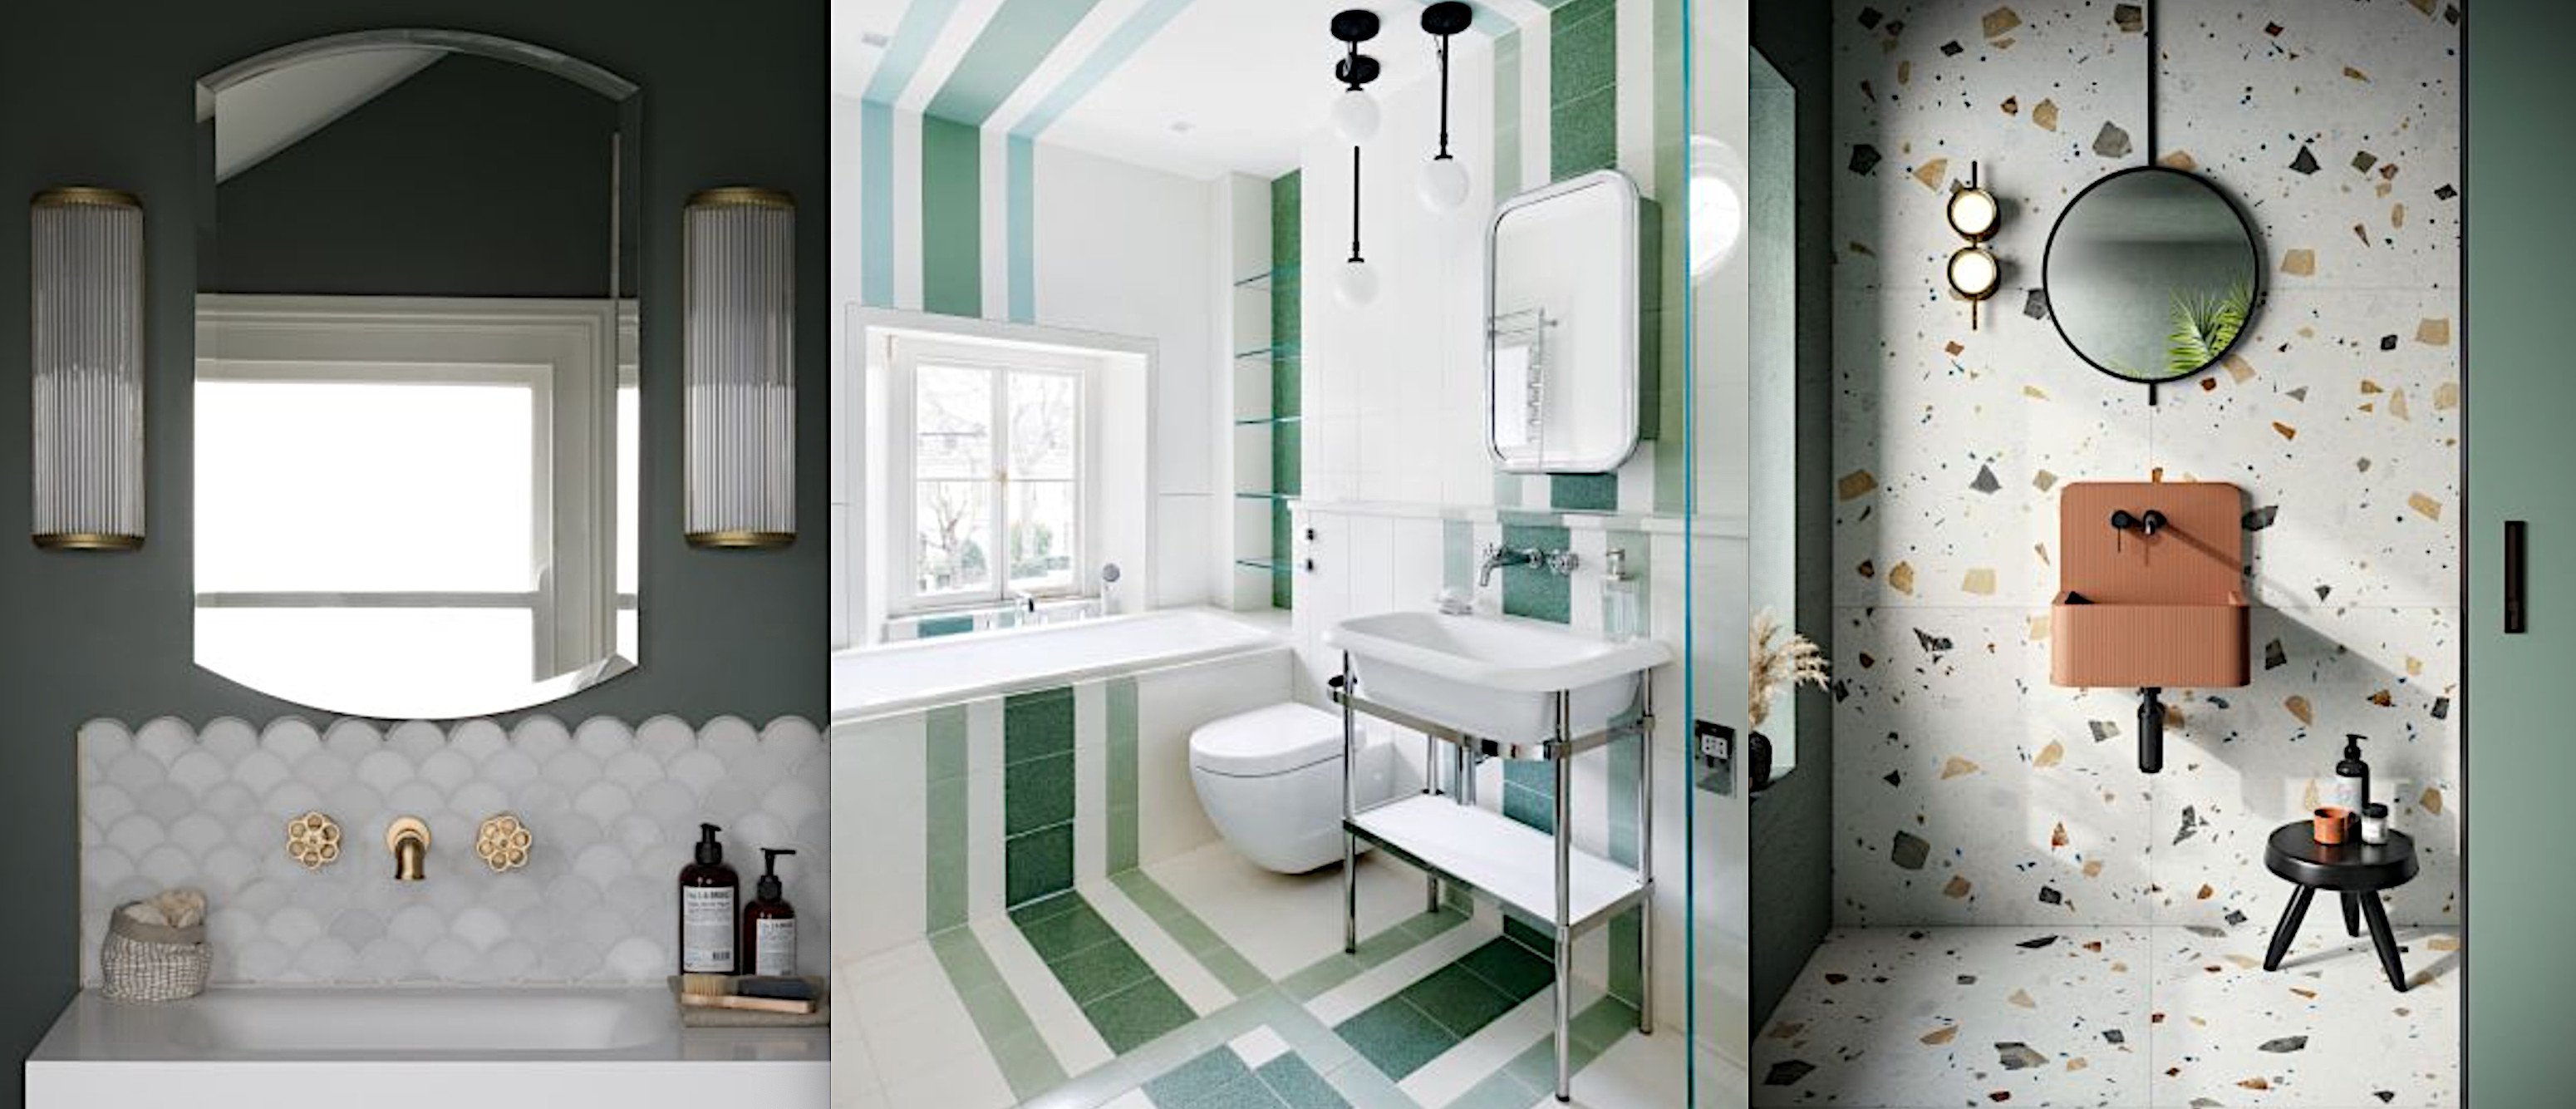 Painting Bathroom Tiles Better Homes And Gardens Everything Bathroom